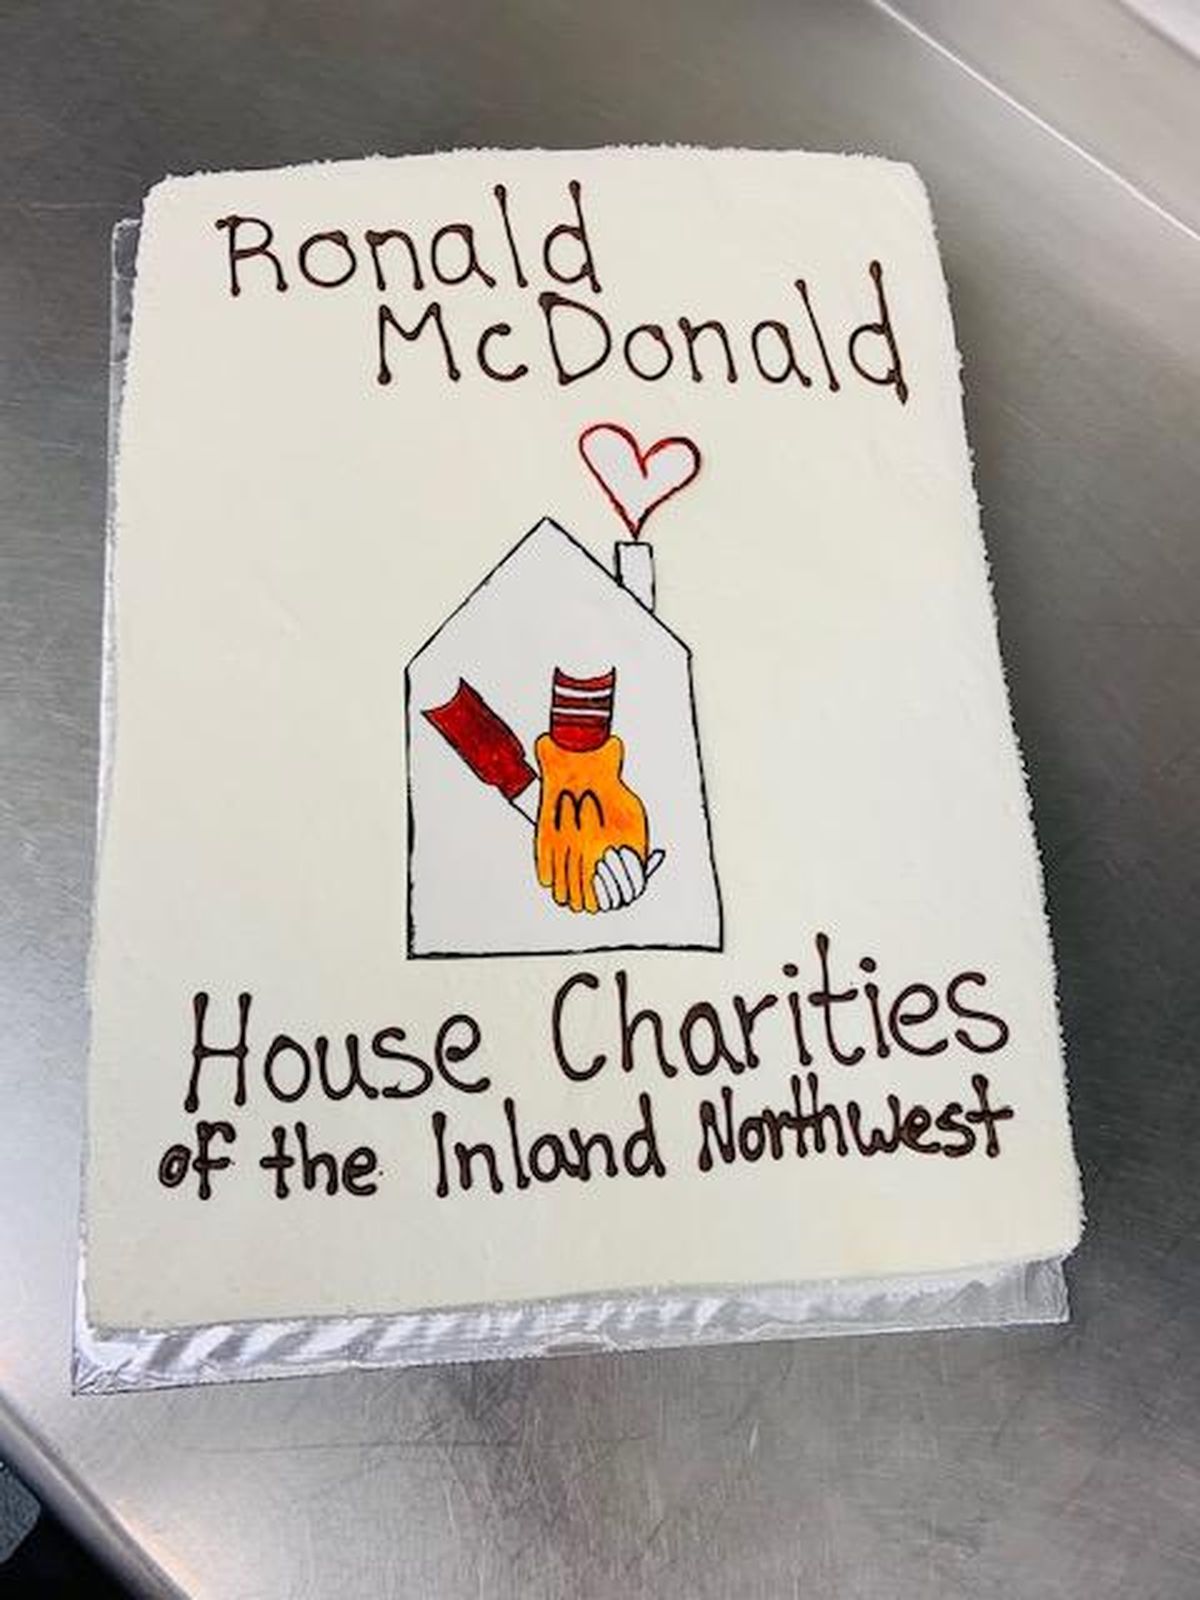 Northern Quest Resort & Casino baked a cake for the Ronald McDonald House on March 18. (Courtesy)